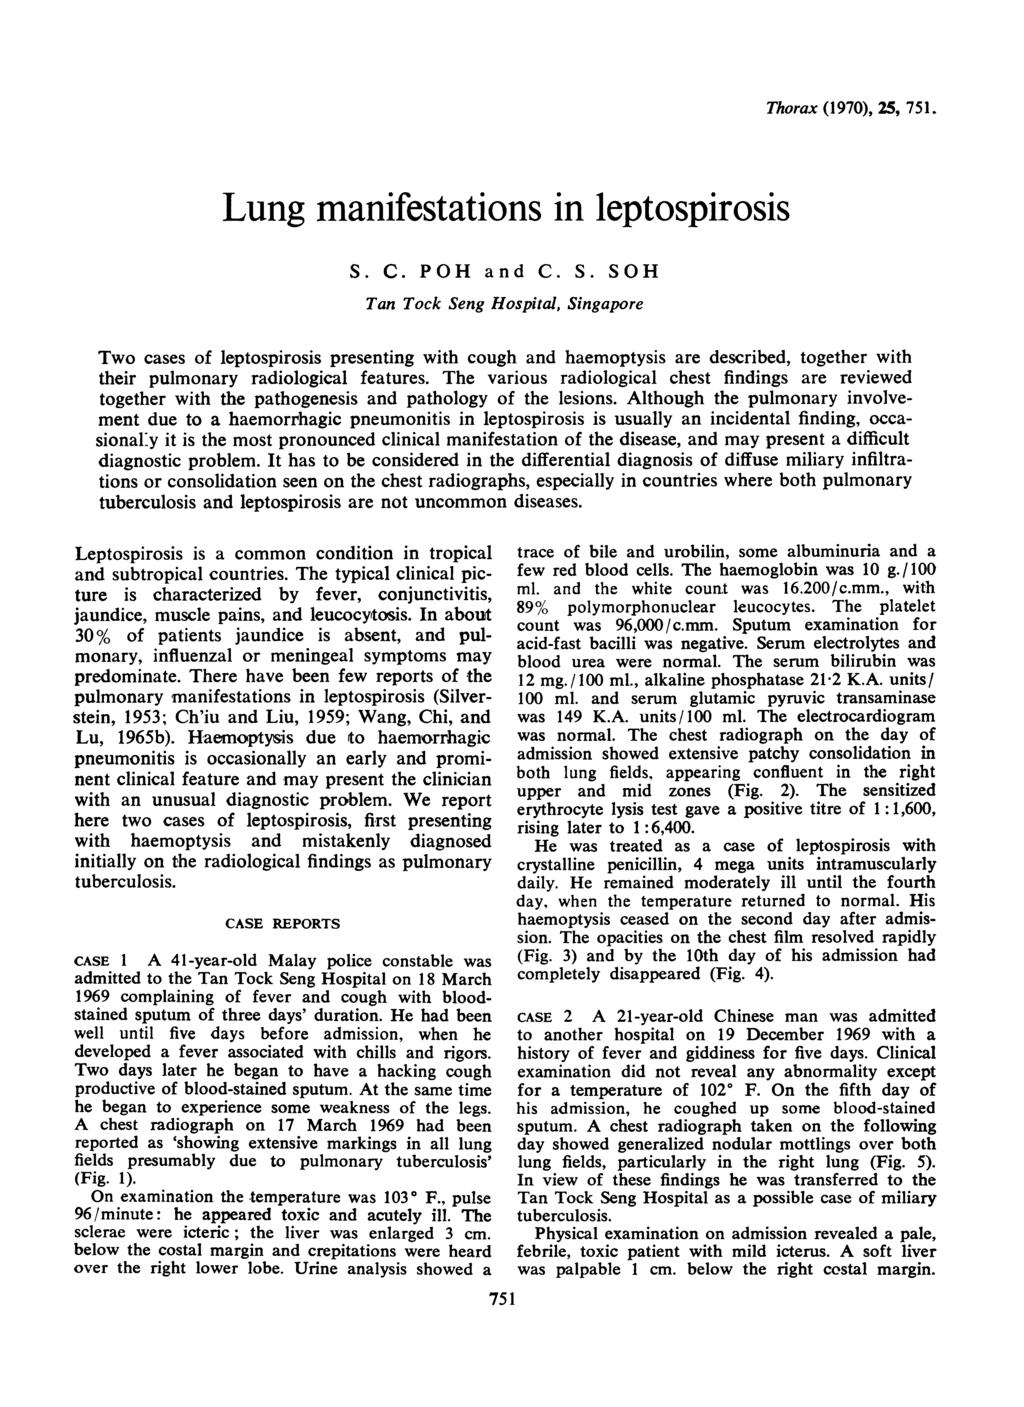 Lung manifestations in leptospirosis S. C. POH and C. S. SOH Tan Tock Seng Hospital, Singapore Thorax (1970), 25, 751.